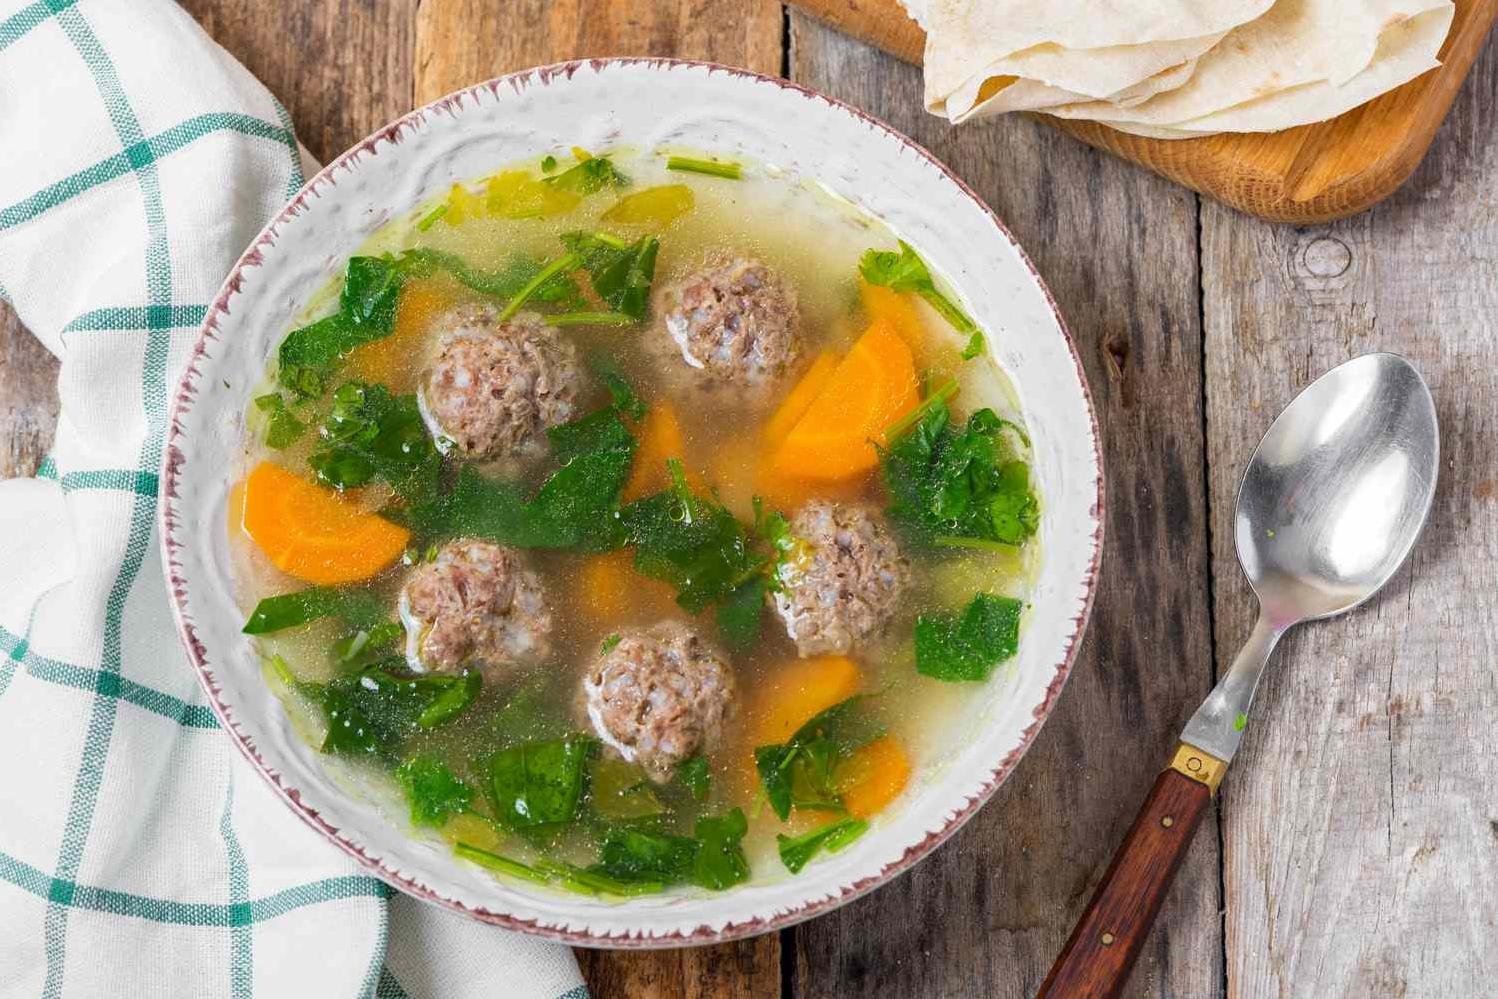  Homemade meatballs swimming in a flavorful broth.